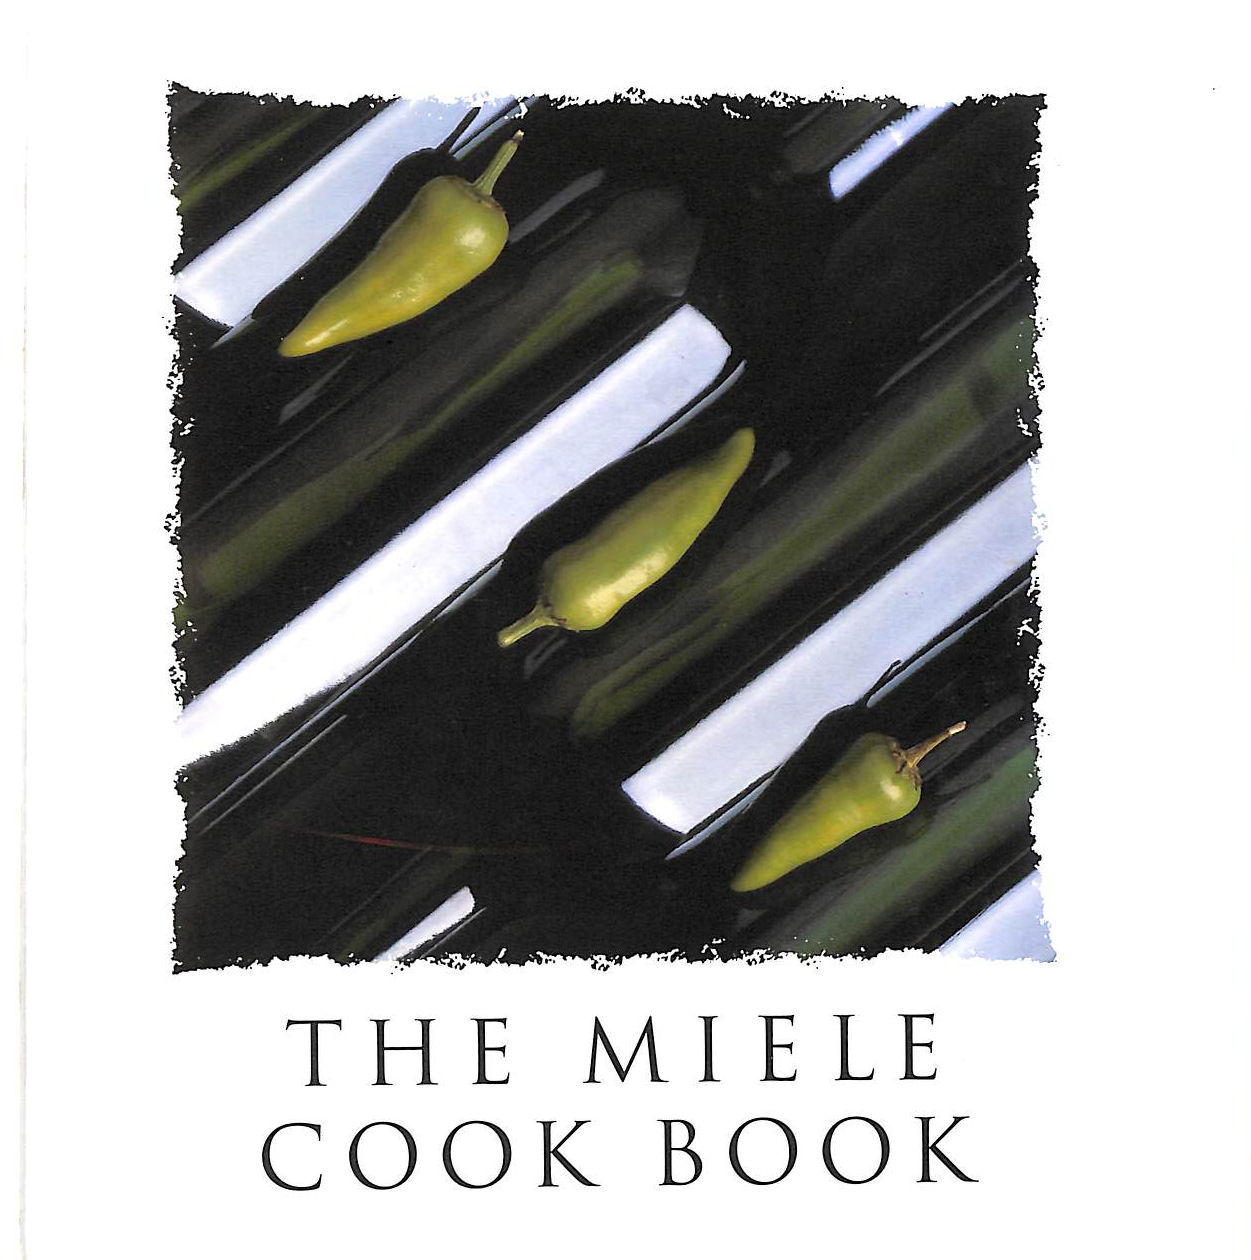 NO LISTED AUTHOR - The Miele Cook Book